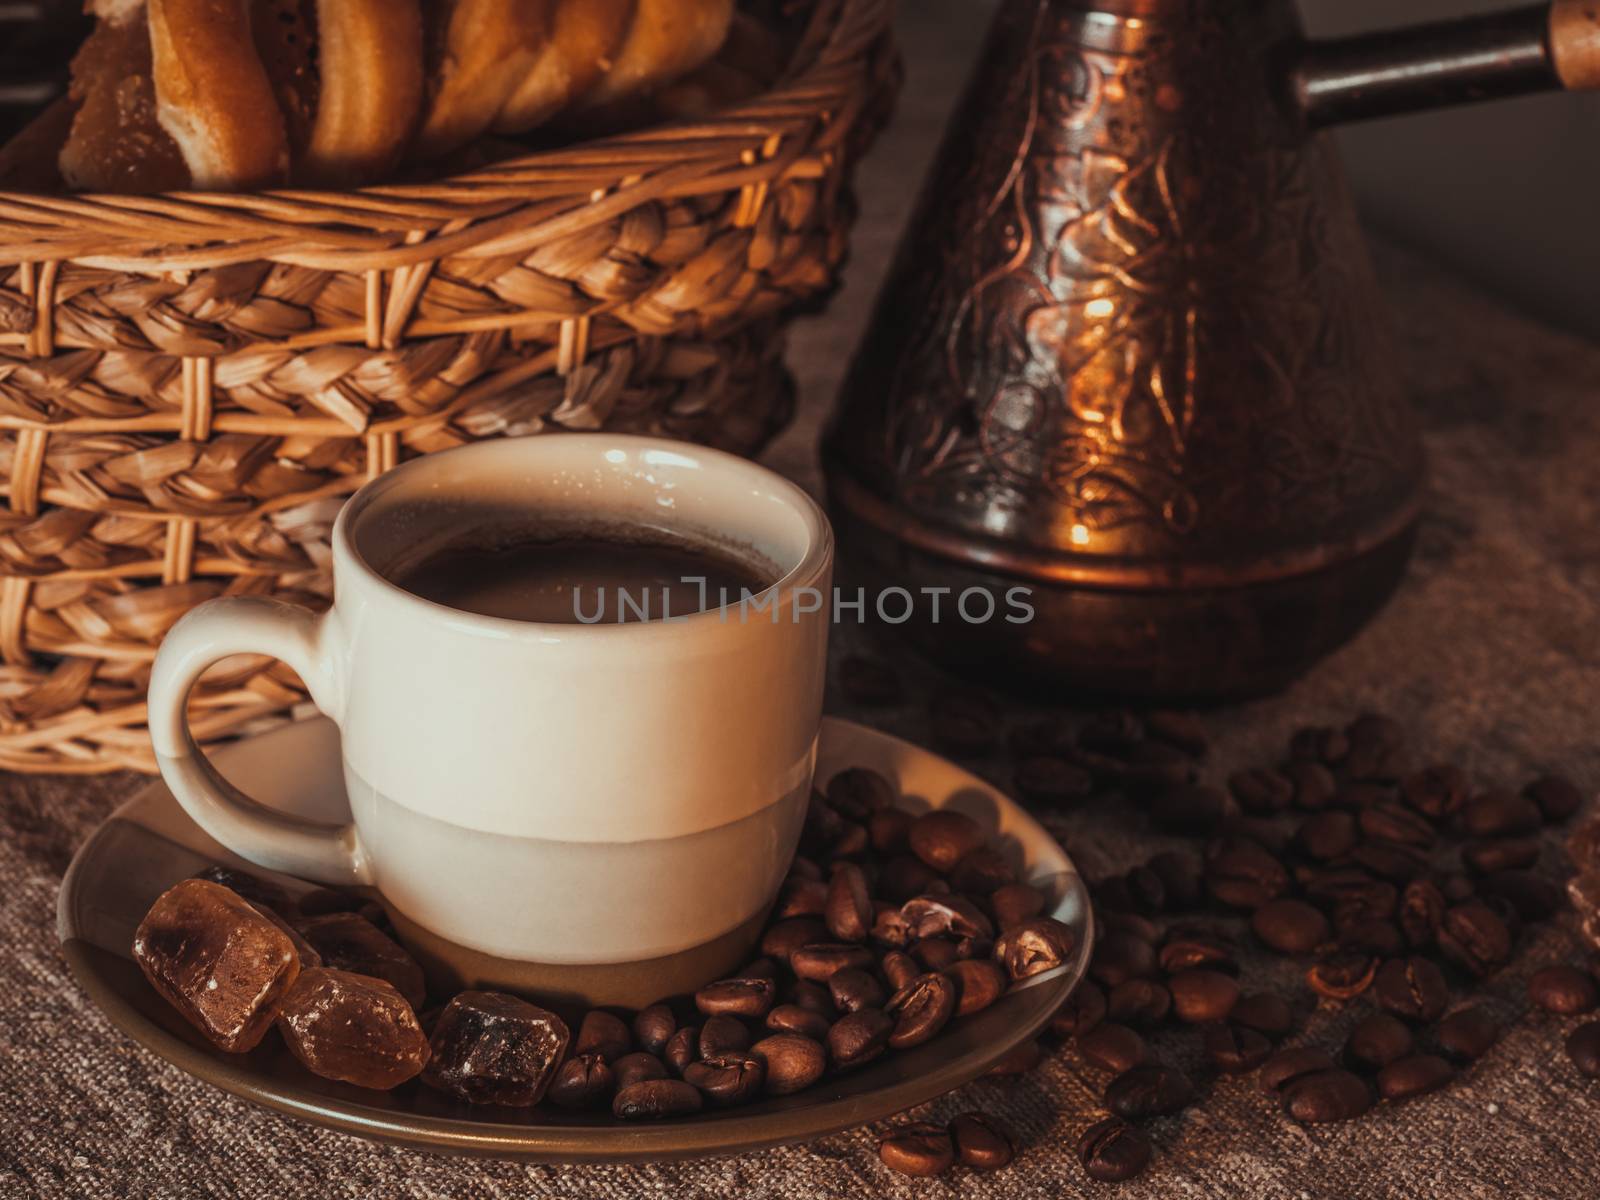 A cup of coffee on textile with coffee beans, dark candy sugar, pots, basket and cake